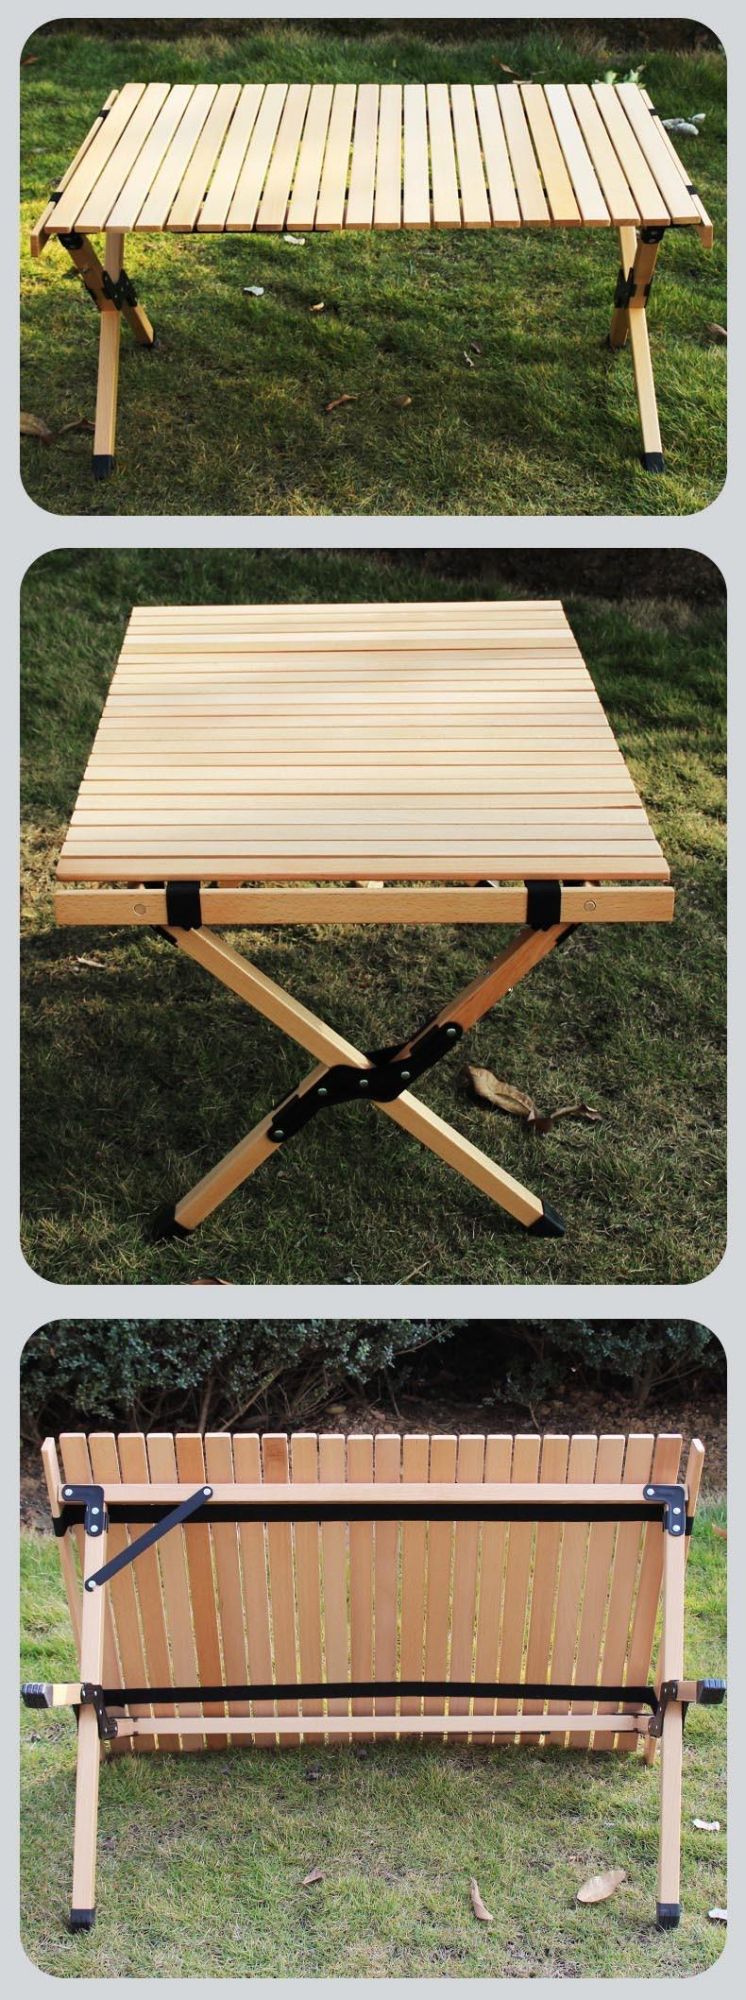 2022 New Outdoor Portable Roll up Lightweight BBQ Picnic Wood Grain Aluminum Folding Table